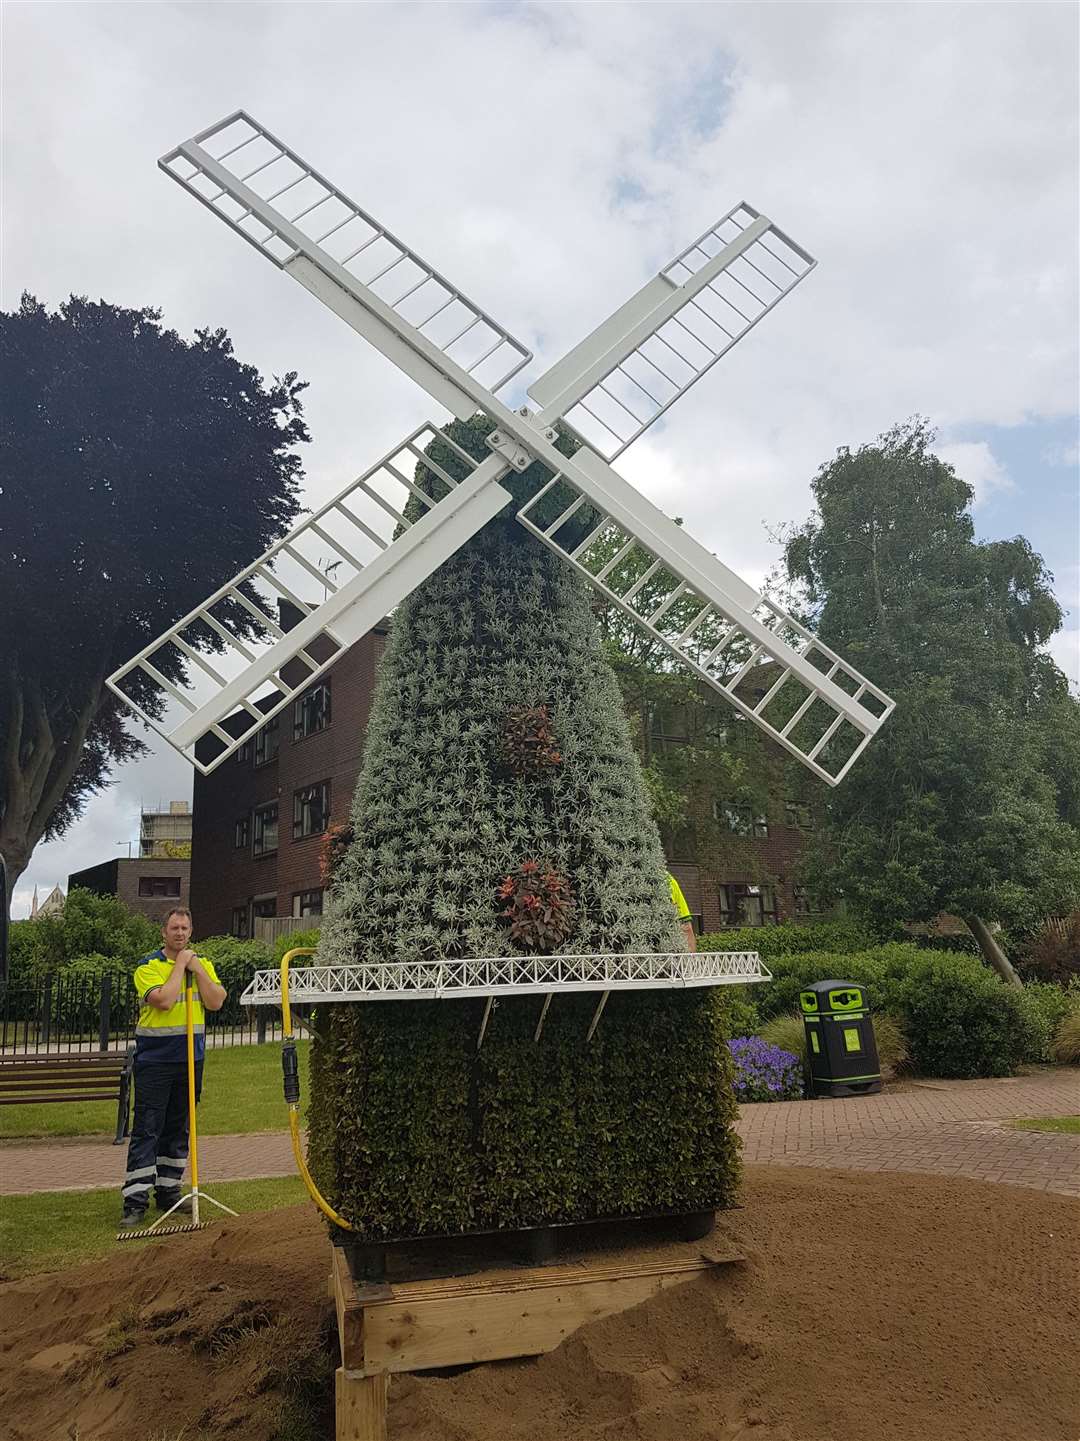 Council employees have been installing the mill sculpture today on a specially-built mound in Ashford's Memorial Gardens